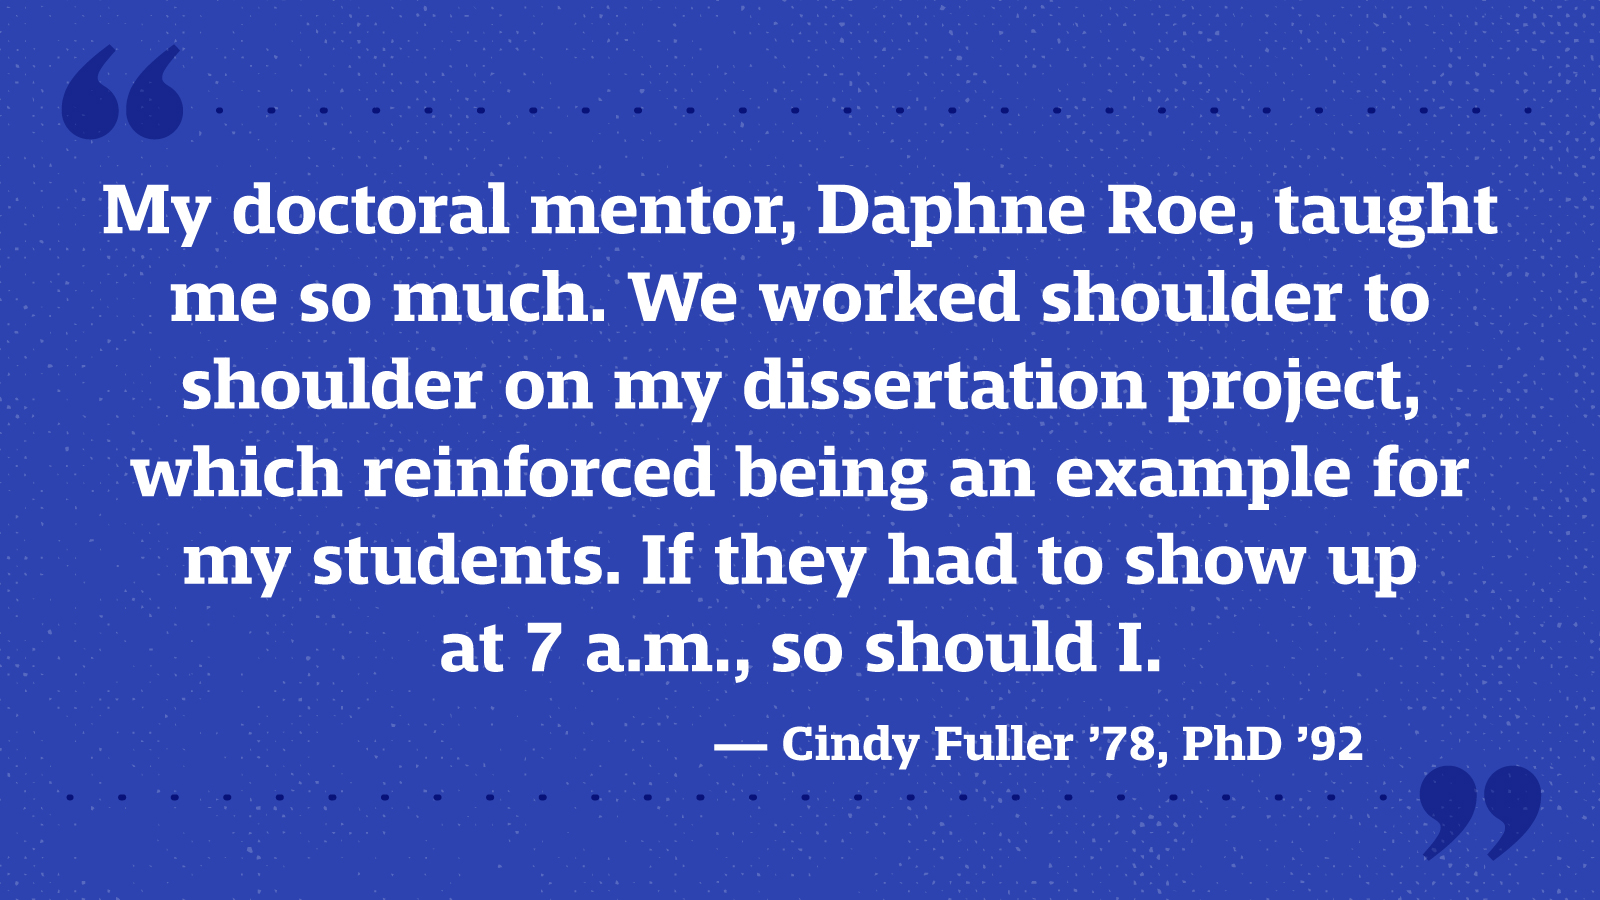 My doctoral mentor, Daphne Roe, taught me so much. We worked shoulder to shoulder on my dissertation project, which reinforced being an example for my students. If they had to show up at 7 a.m., so should I. — Cindy Fuller ’78, PhD ’92